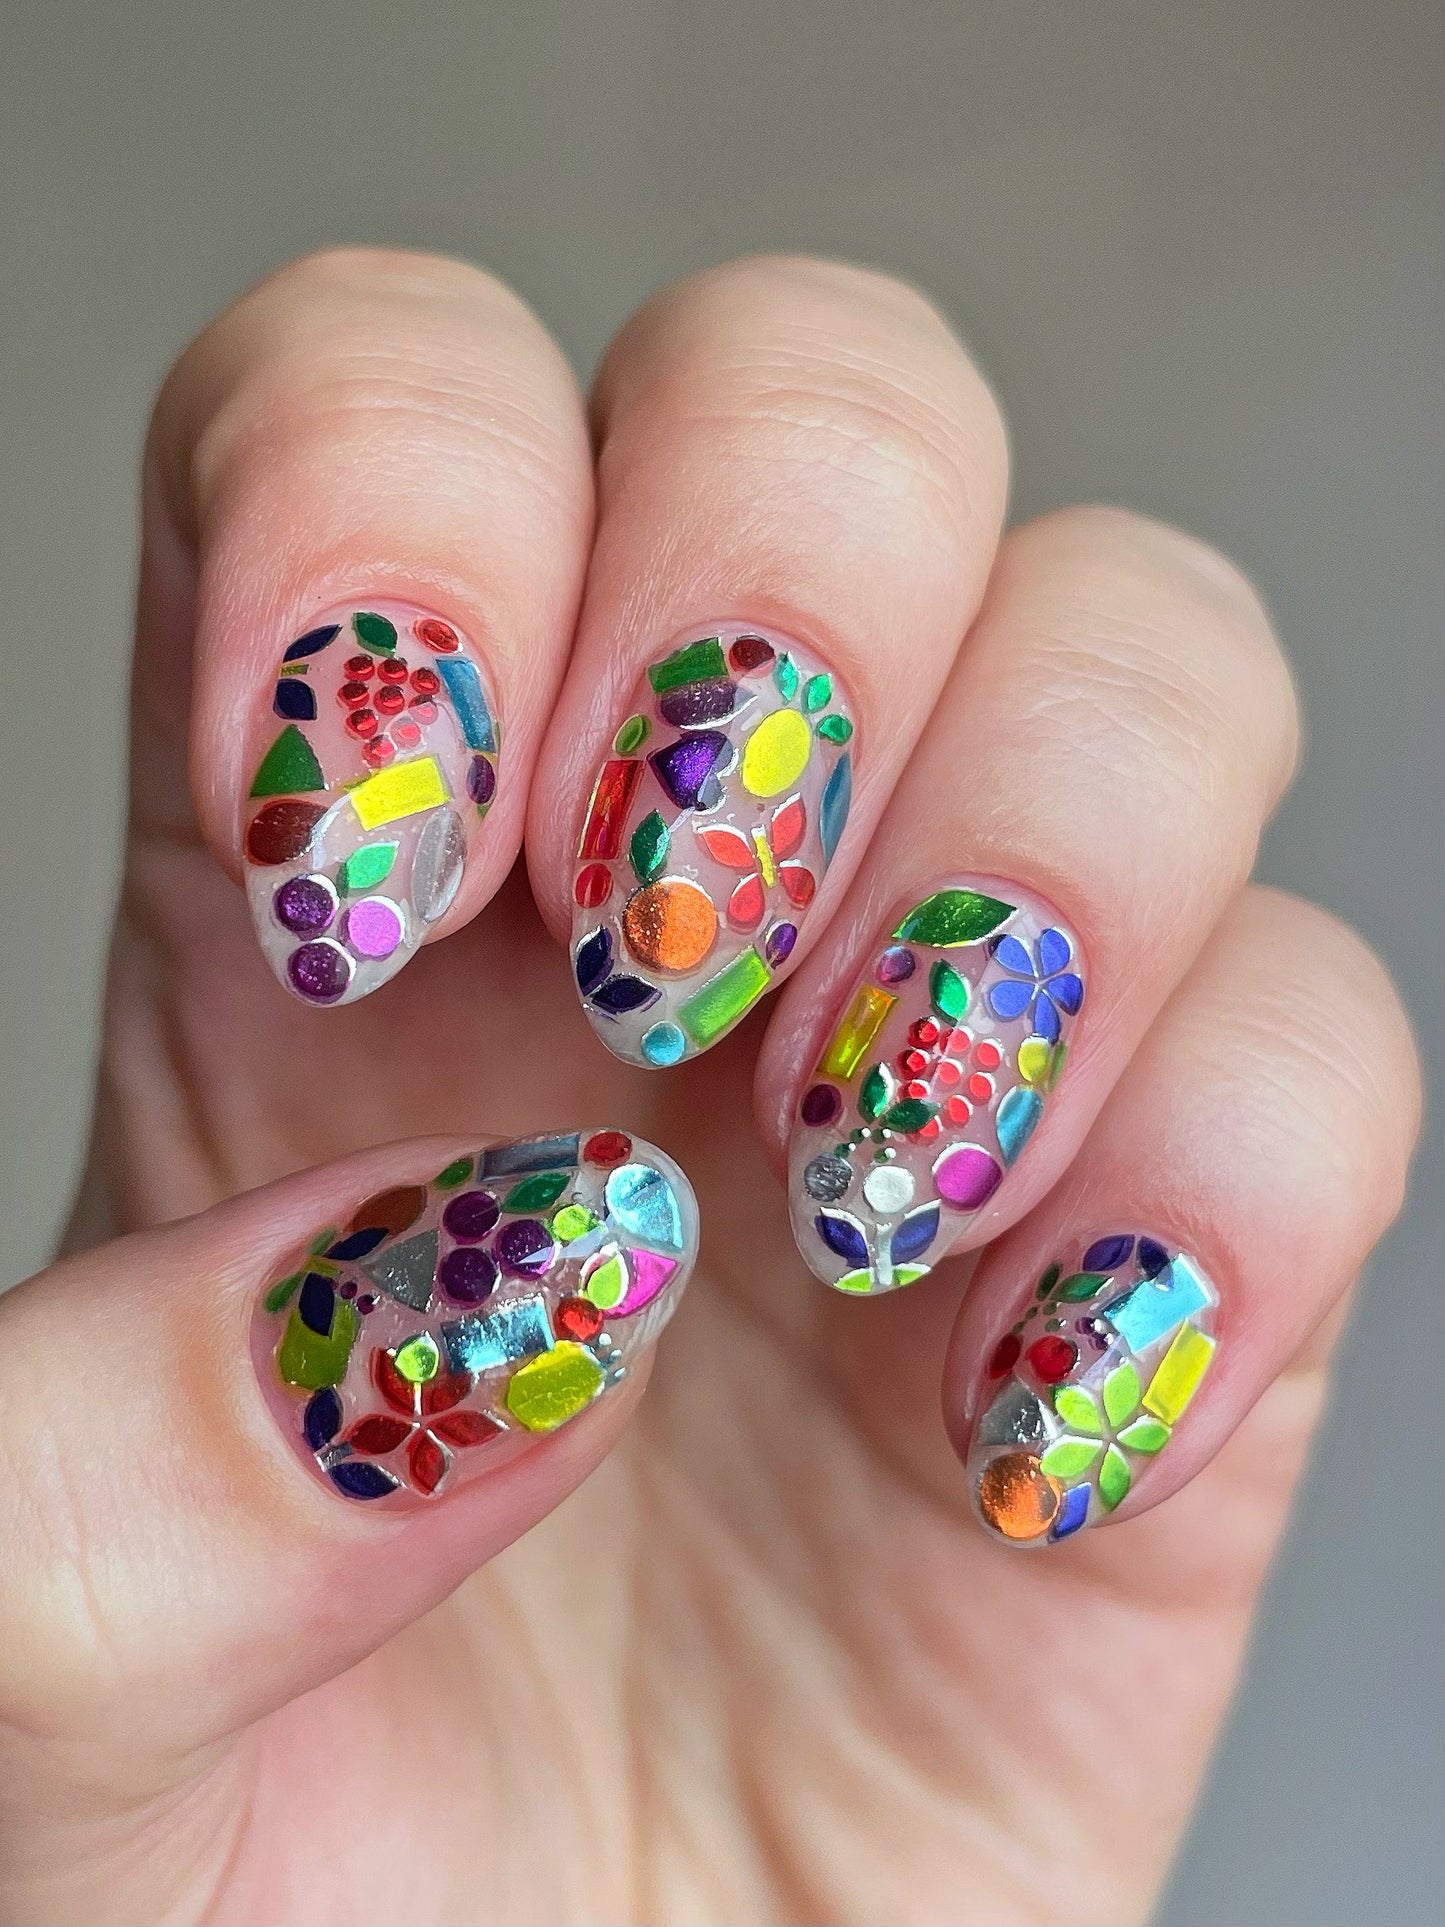 Tutti Frutti nail art stickers on bare nails topped with top coat.